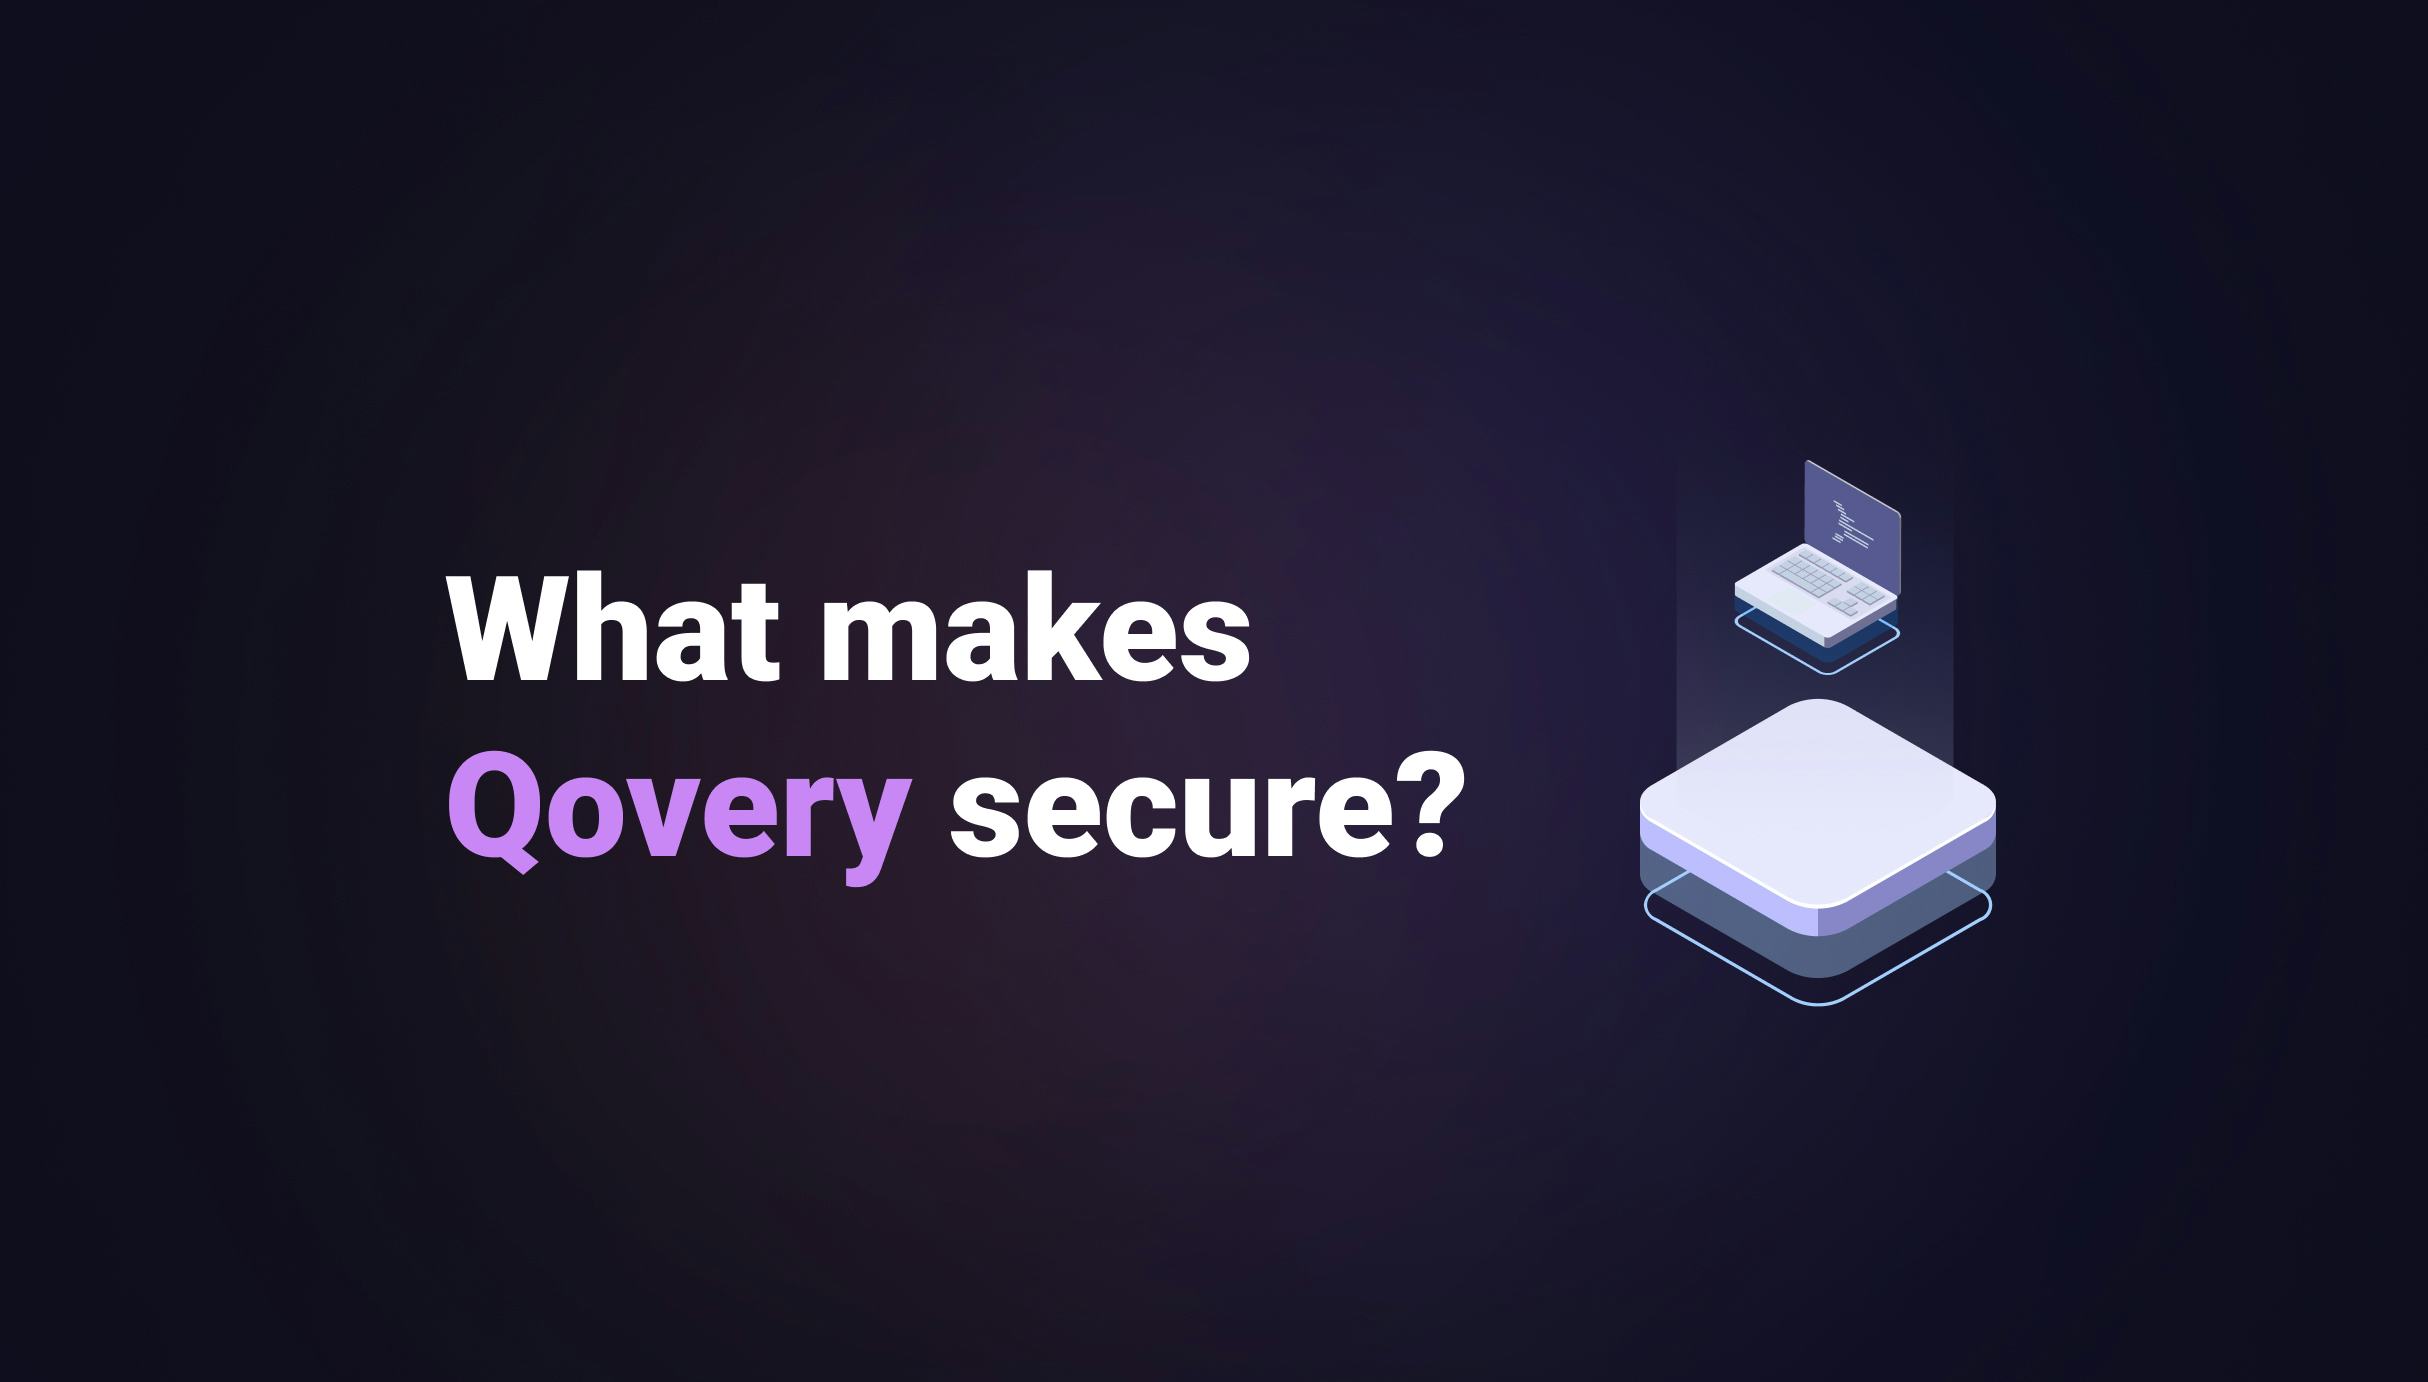 What makes Qovery secure?